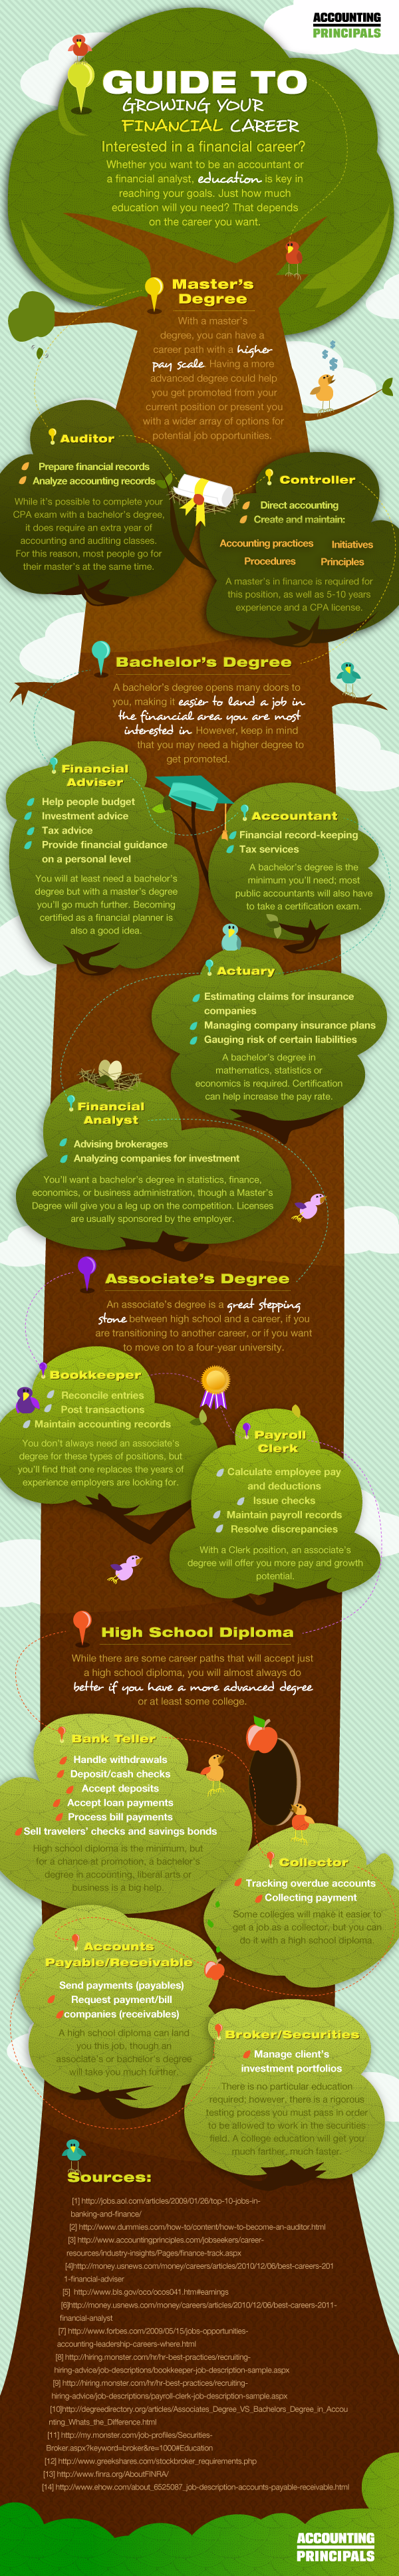 careers in finance infographic